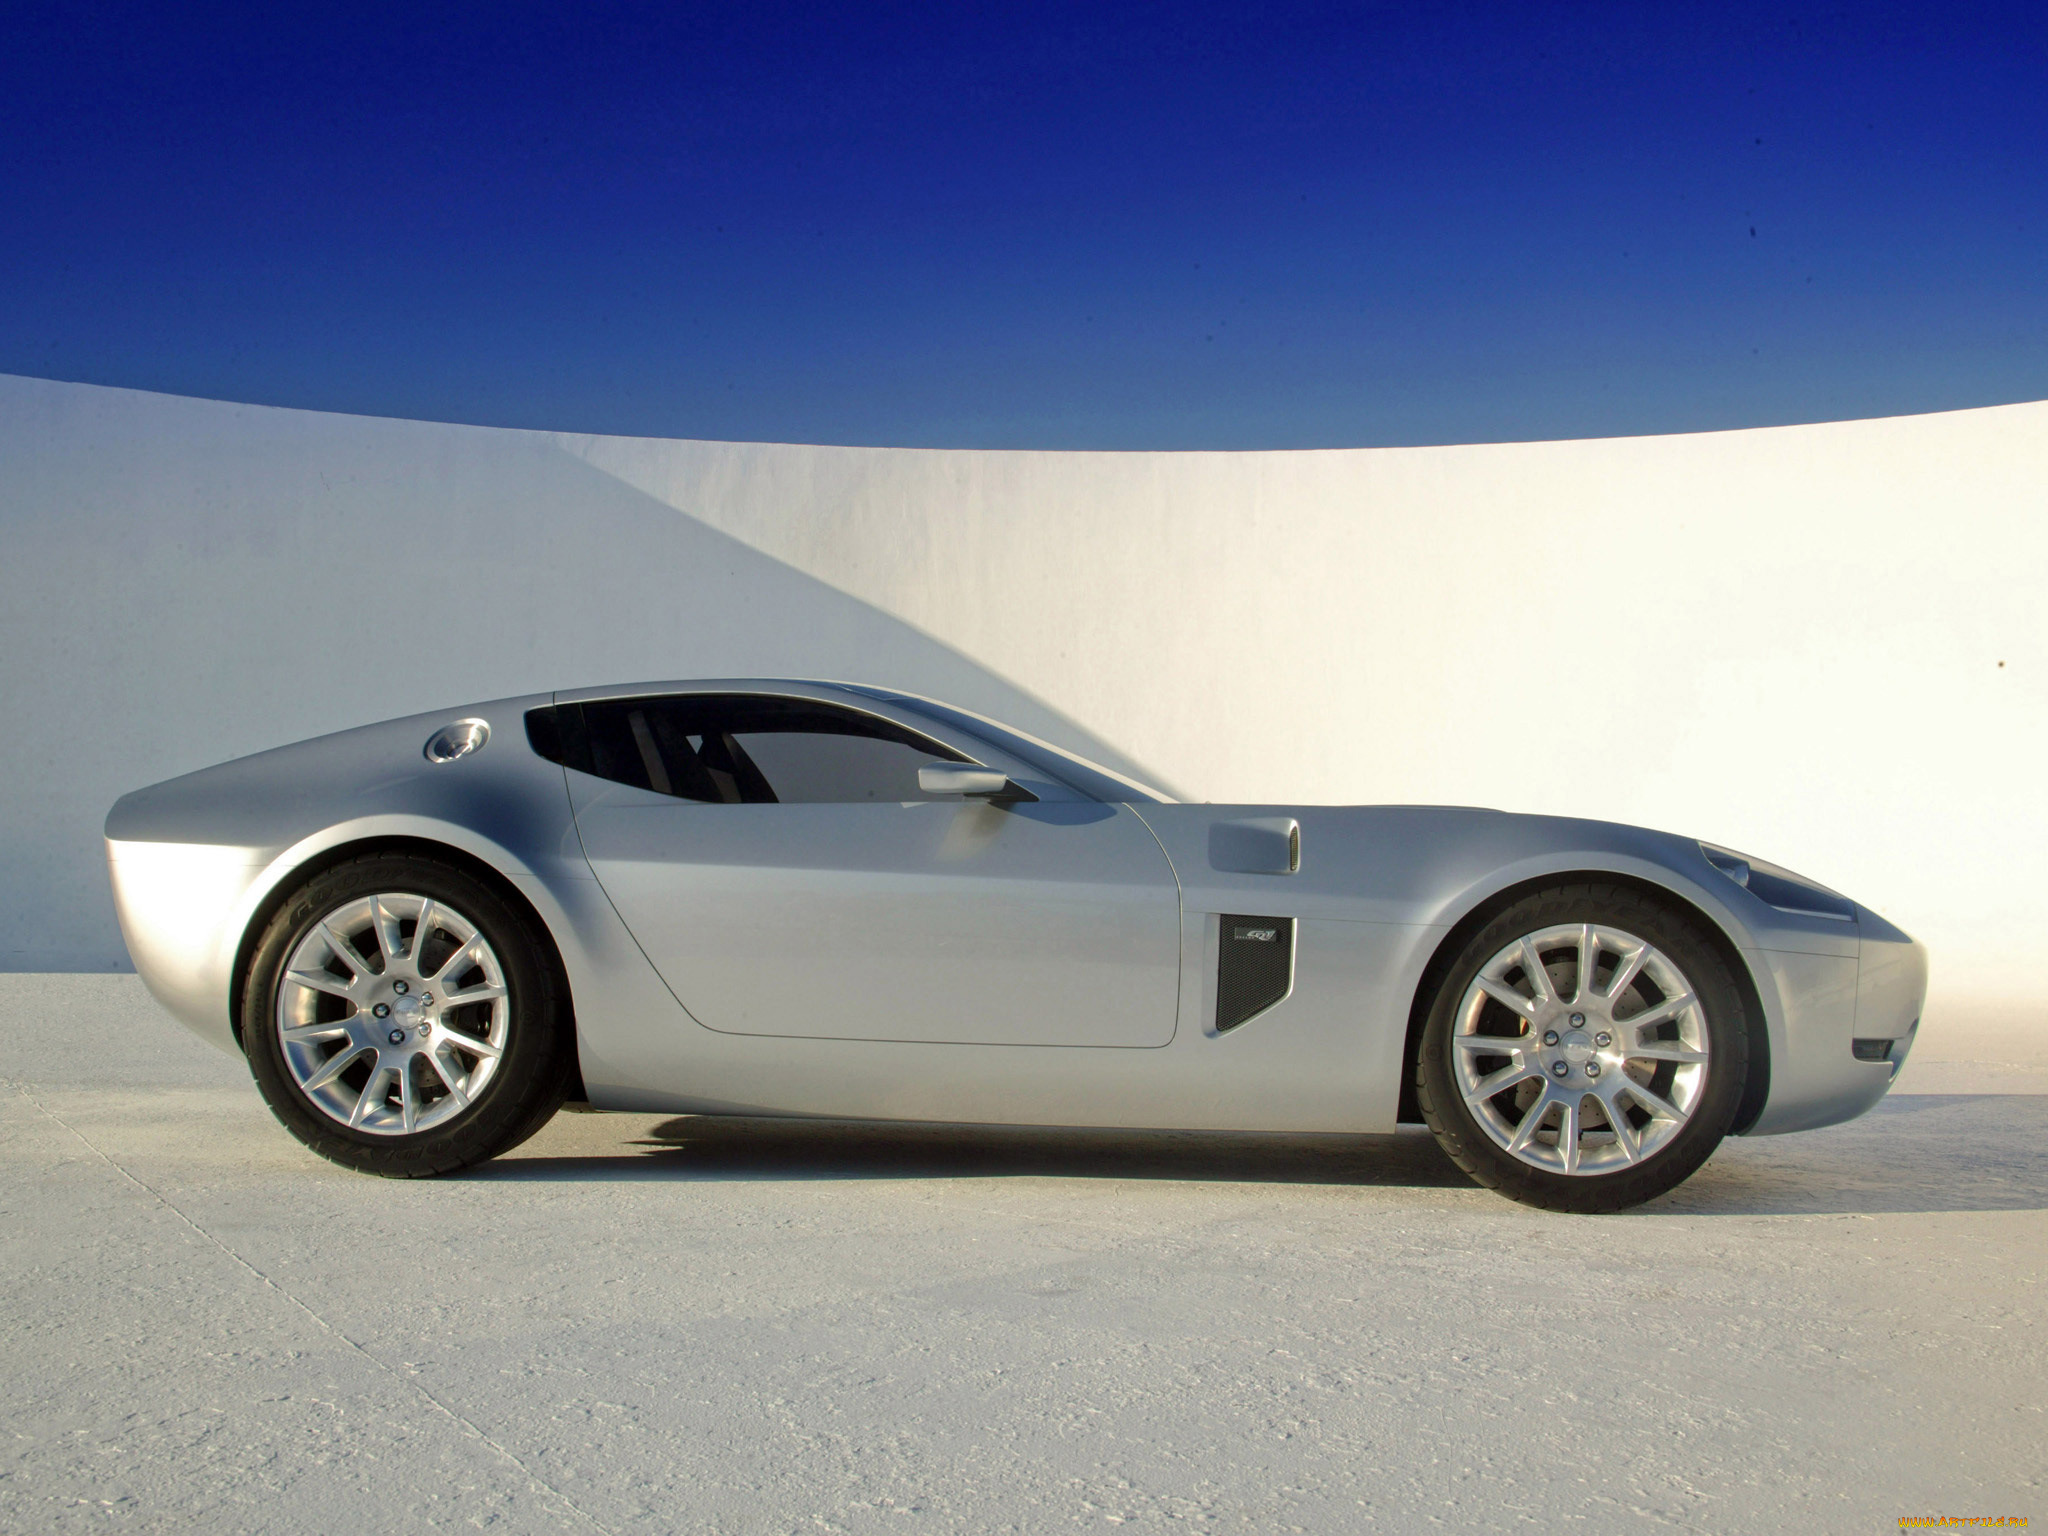 shelby, ford, gr-1, concept, 2005, автомобили, ac, cobra, shelby, 2005, concept, gr-1, ford